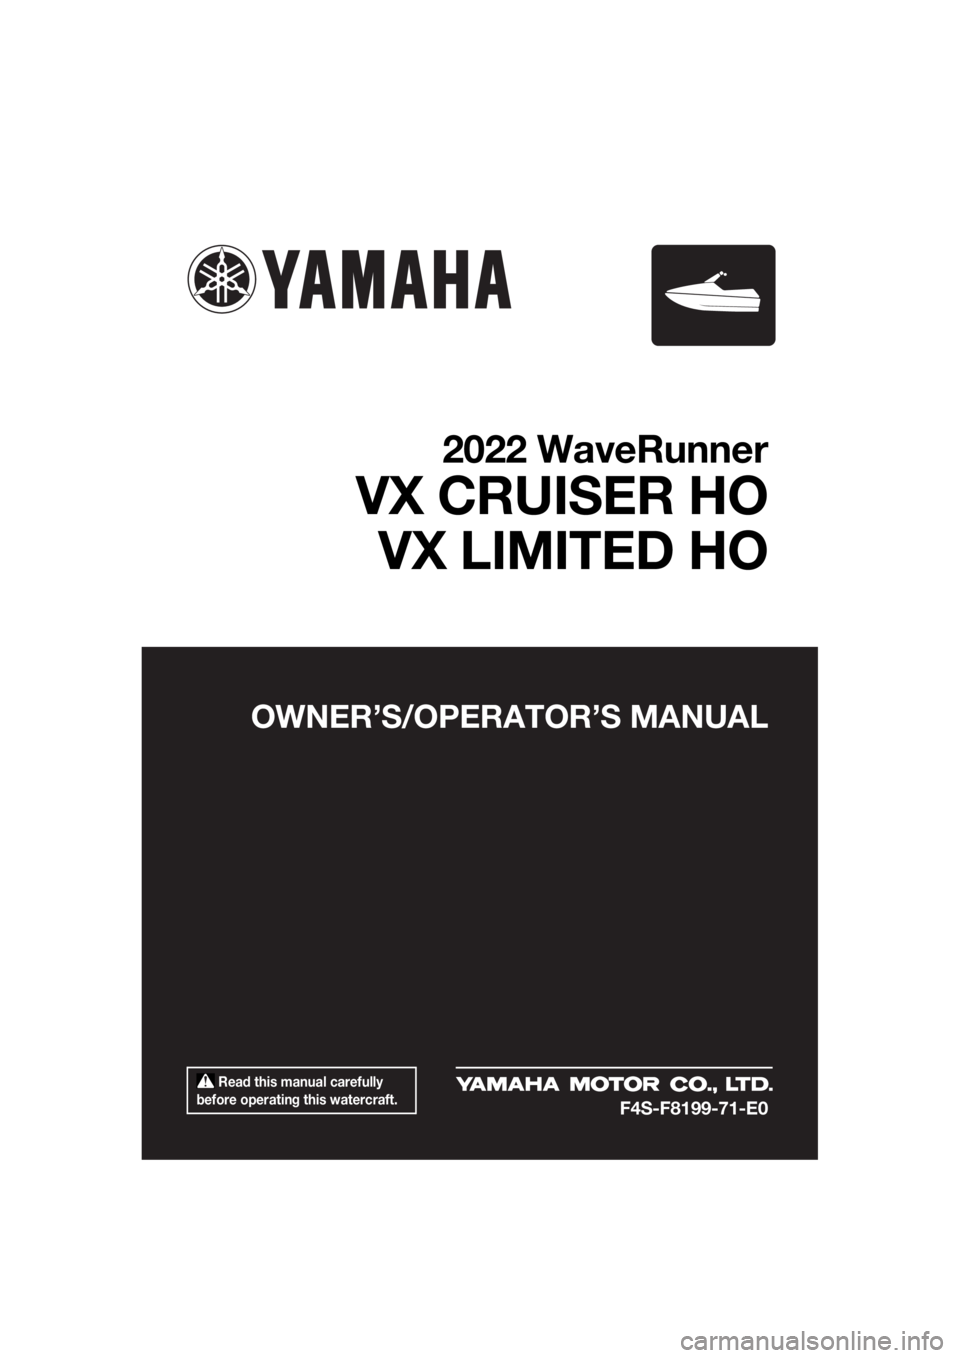 YAMAHA VX LIMITED HO 2022  Owners Manual  Read this manual carefully 
before operating this watercraft.
OWNER’S/OPERAT OR’S MANUAL
2022 WaveRunner
VX CRUISER HO
VX LIMITED HO
F4S-F8199-71-E0
UF4S71E0.book  Page 1  Wednesday, August 4, 20